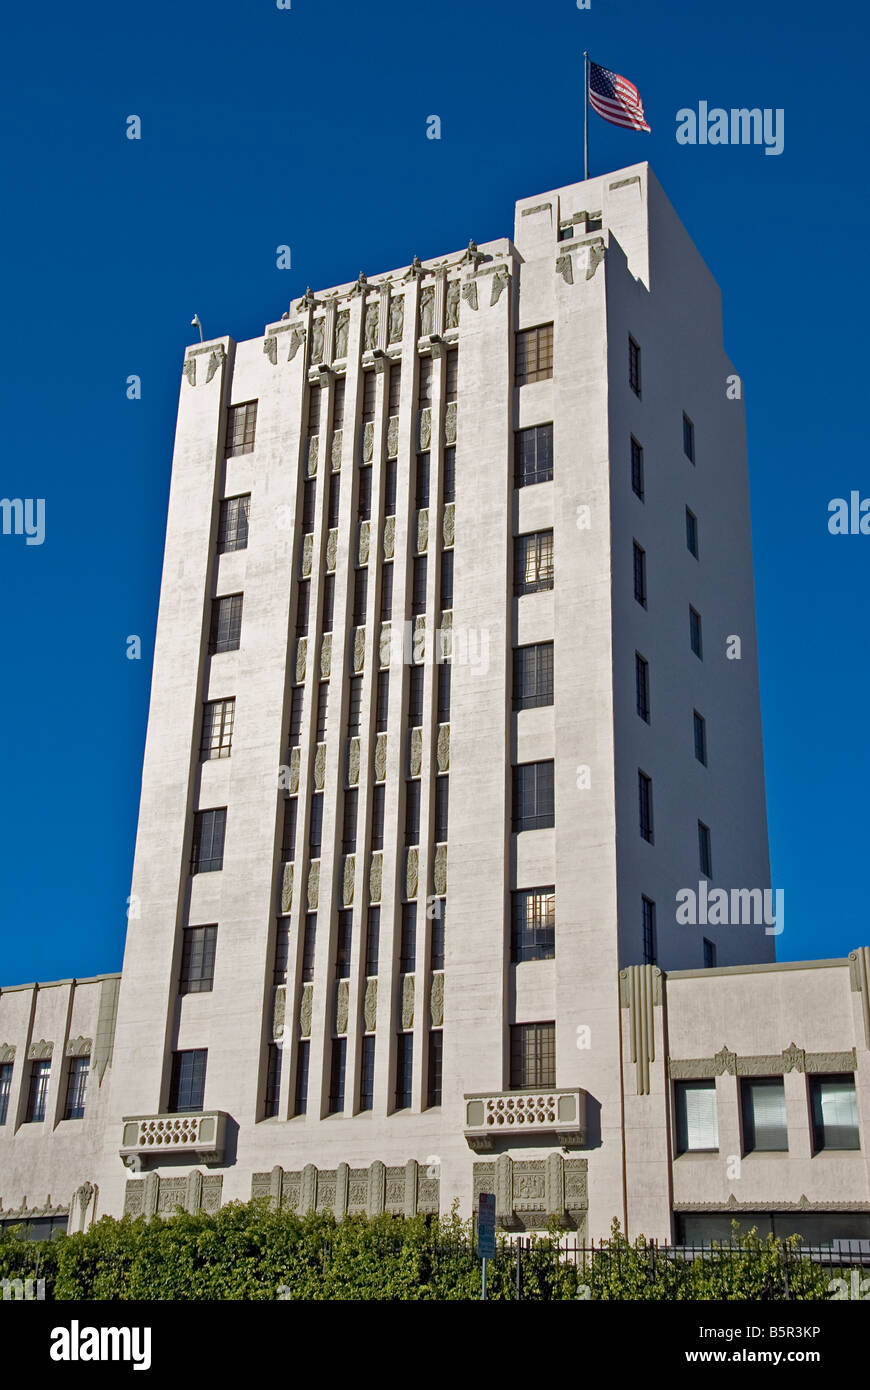 Historic Pacific Building Hollywood Los Angeles CA California United States USA Stock Photo